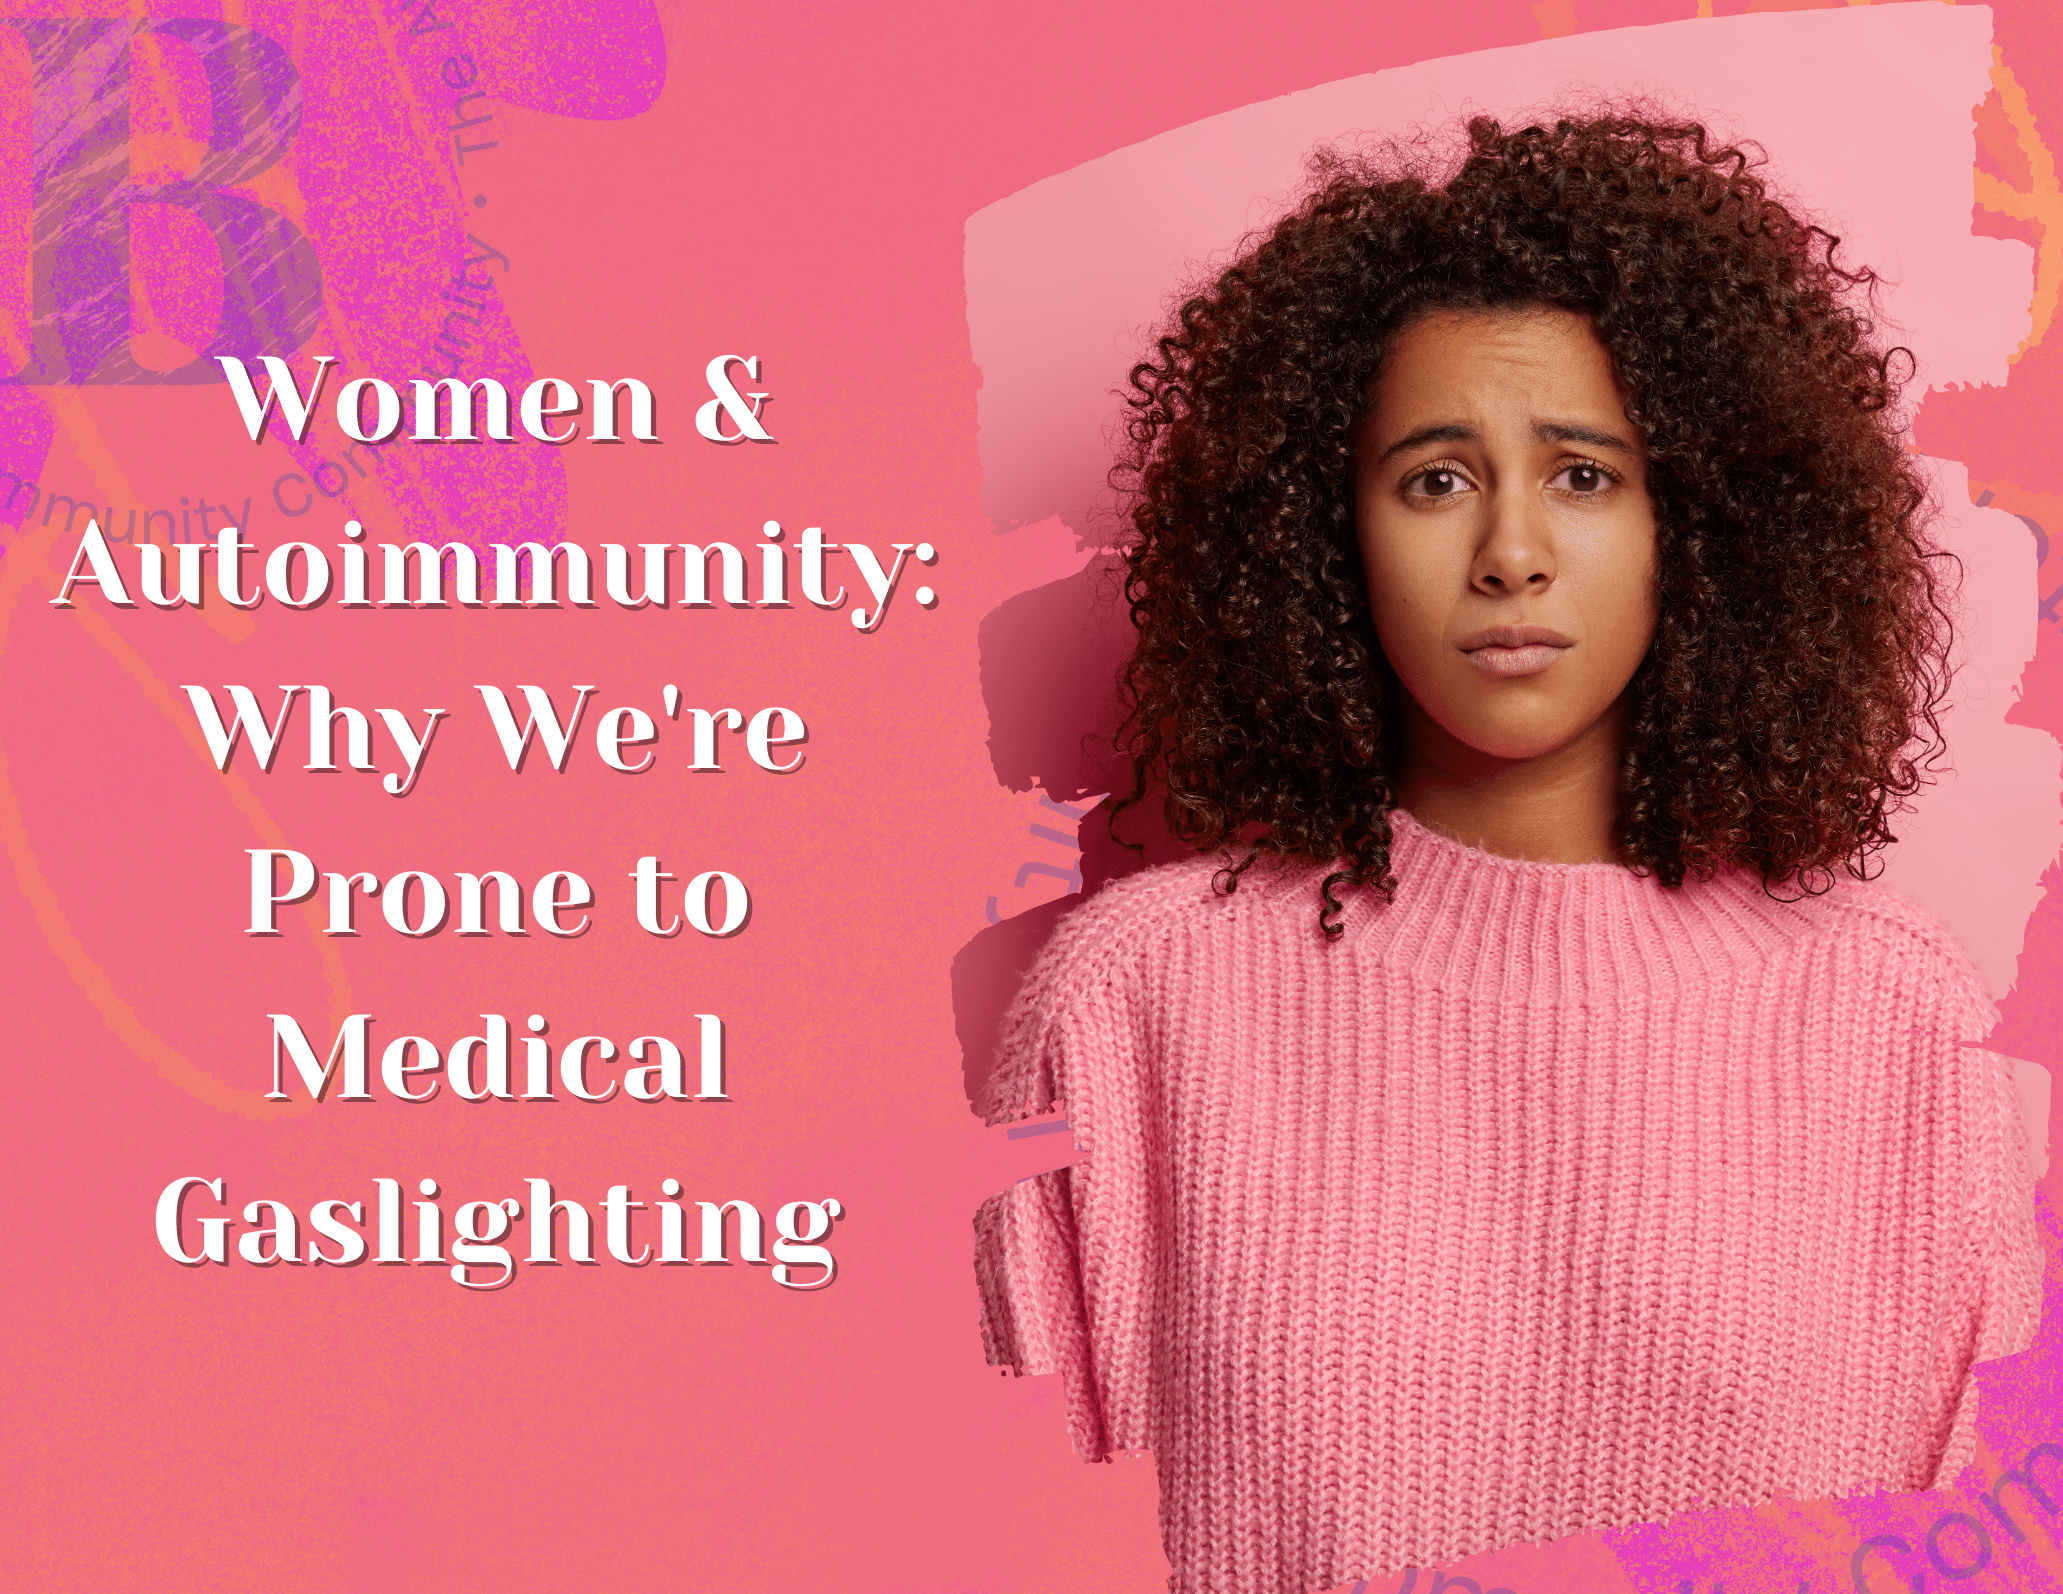 Why We're Prone to Medical Gaslighting